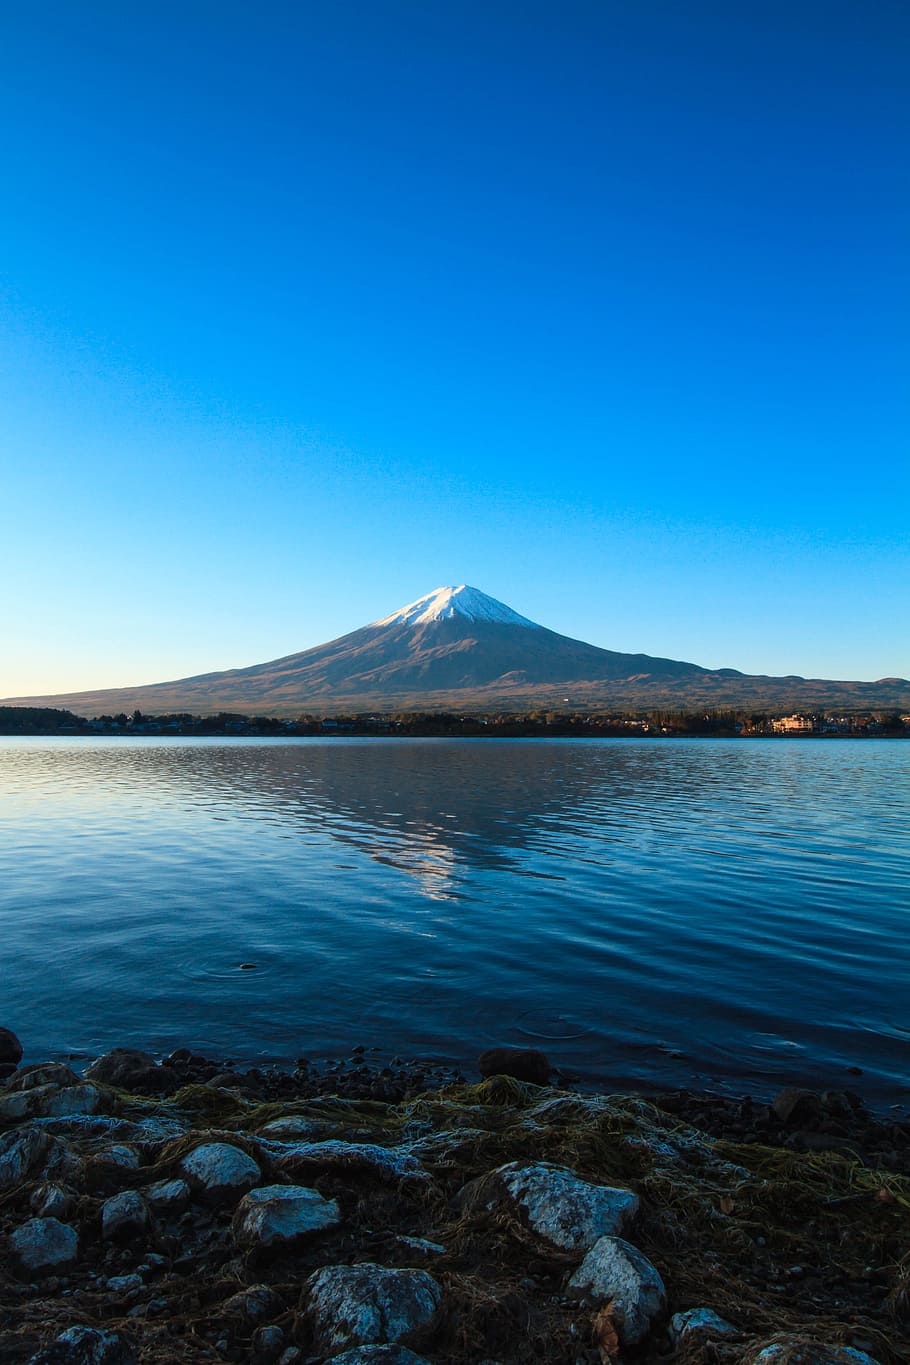 reflection, mountain, water, fuji, japan, blue, sky, scenics - nature, tranquil scene, beauty in nature